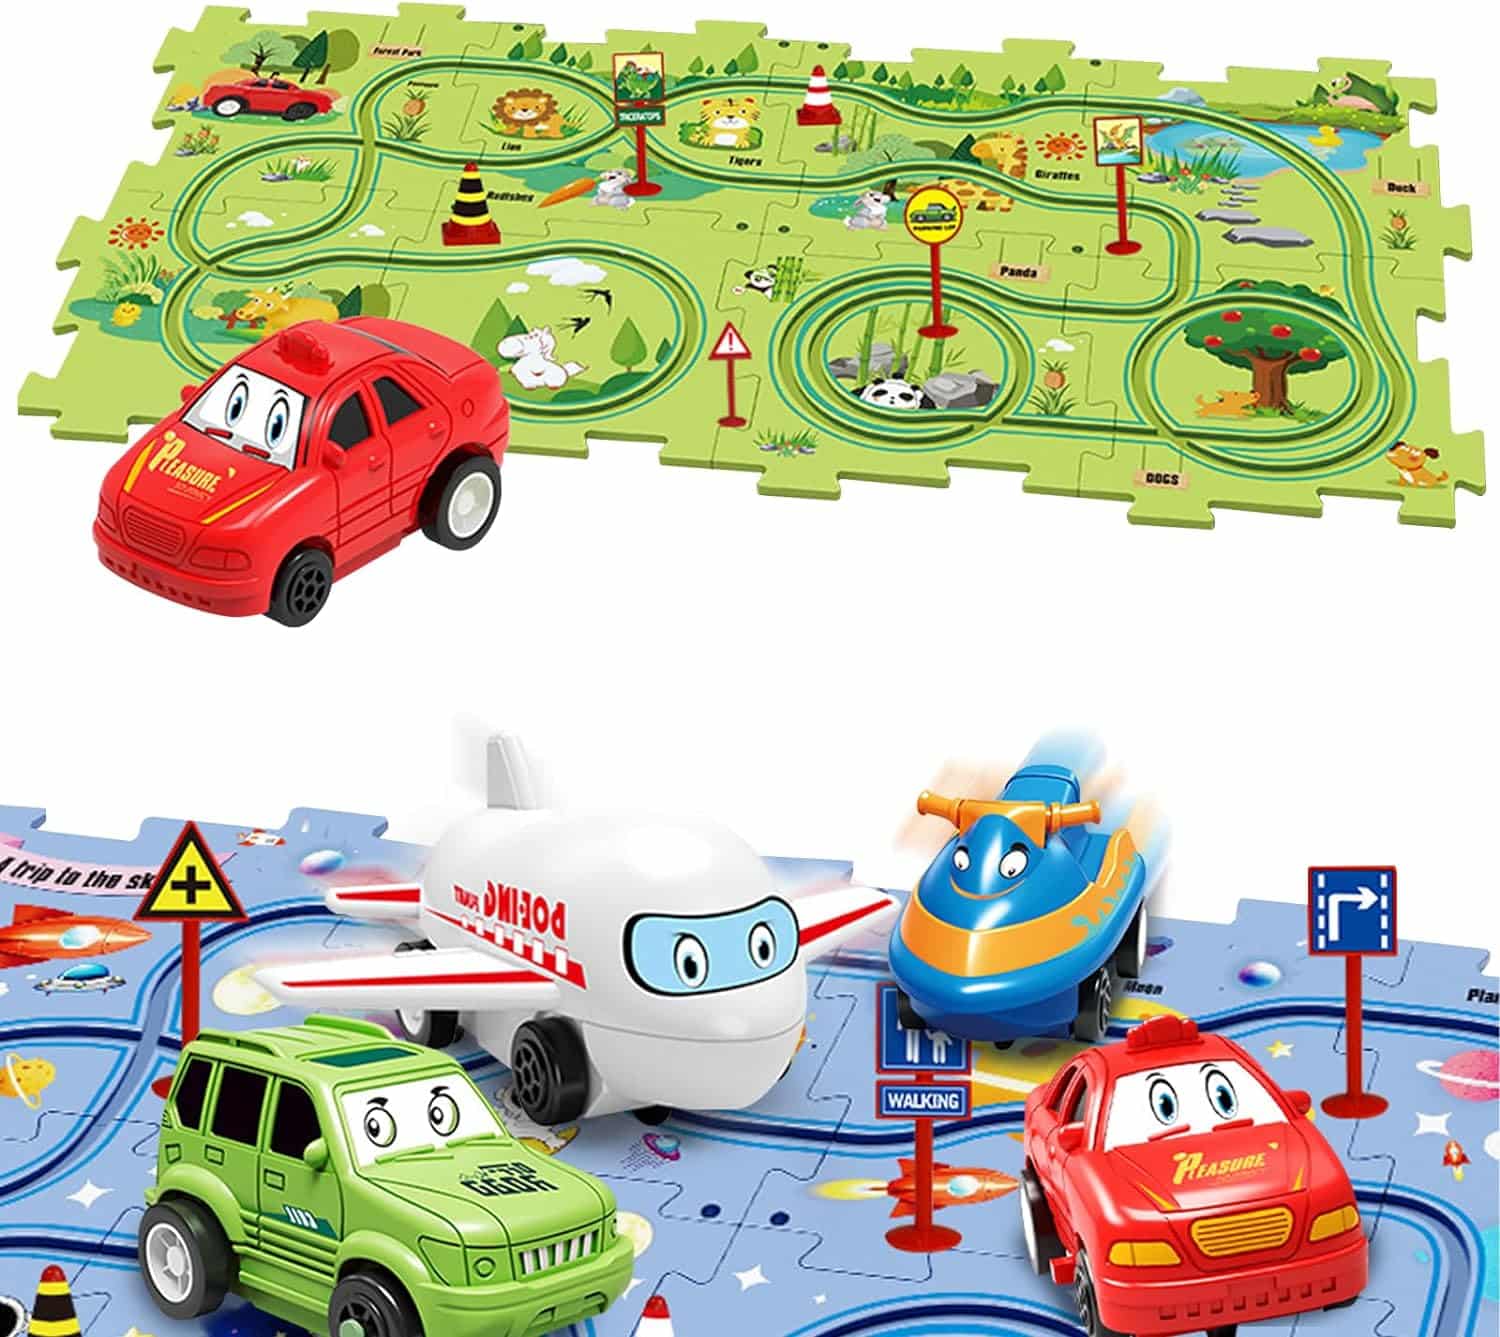 Children's Educational Puzzle Track Car Play Set - DIY Puzzle Tracks with Vehicles, Puzzle Track Play with Vehicles Puzzle Car Tracks for Kids (15 PC, Land)